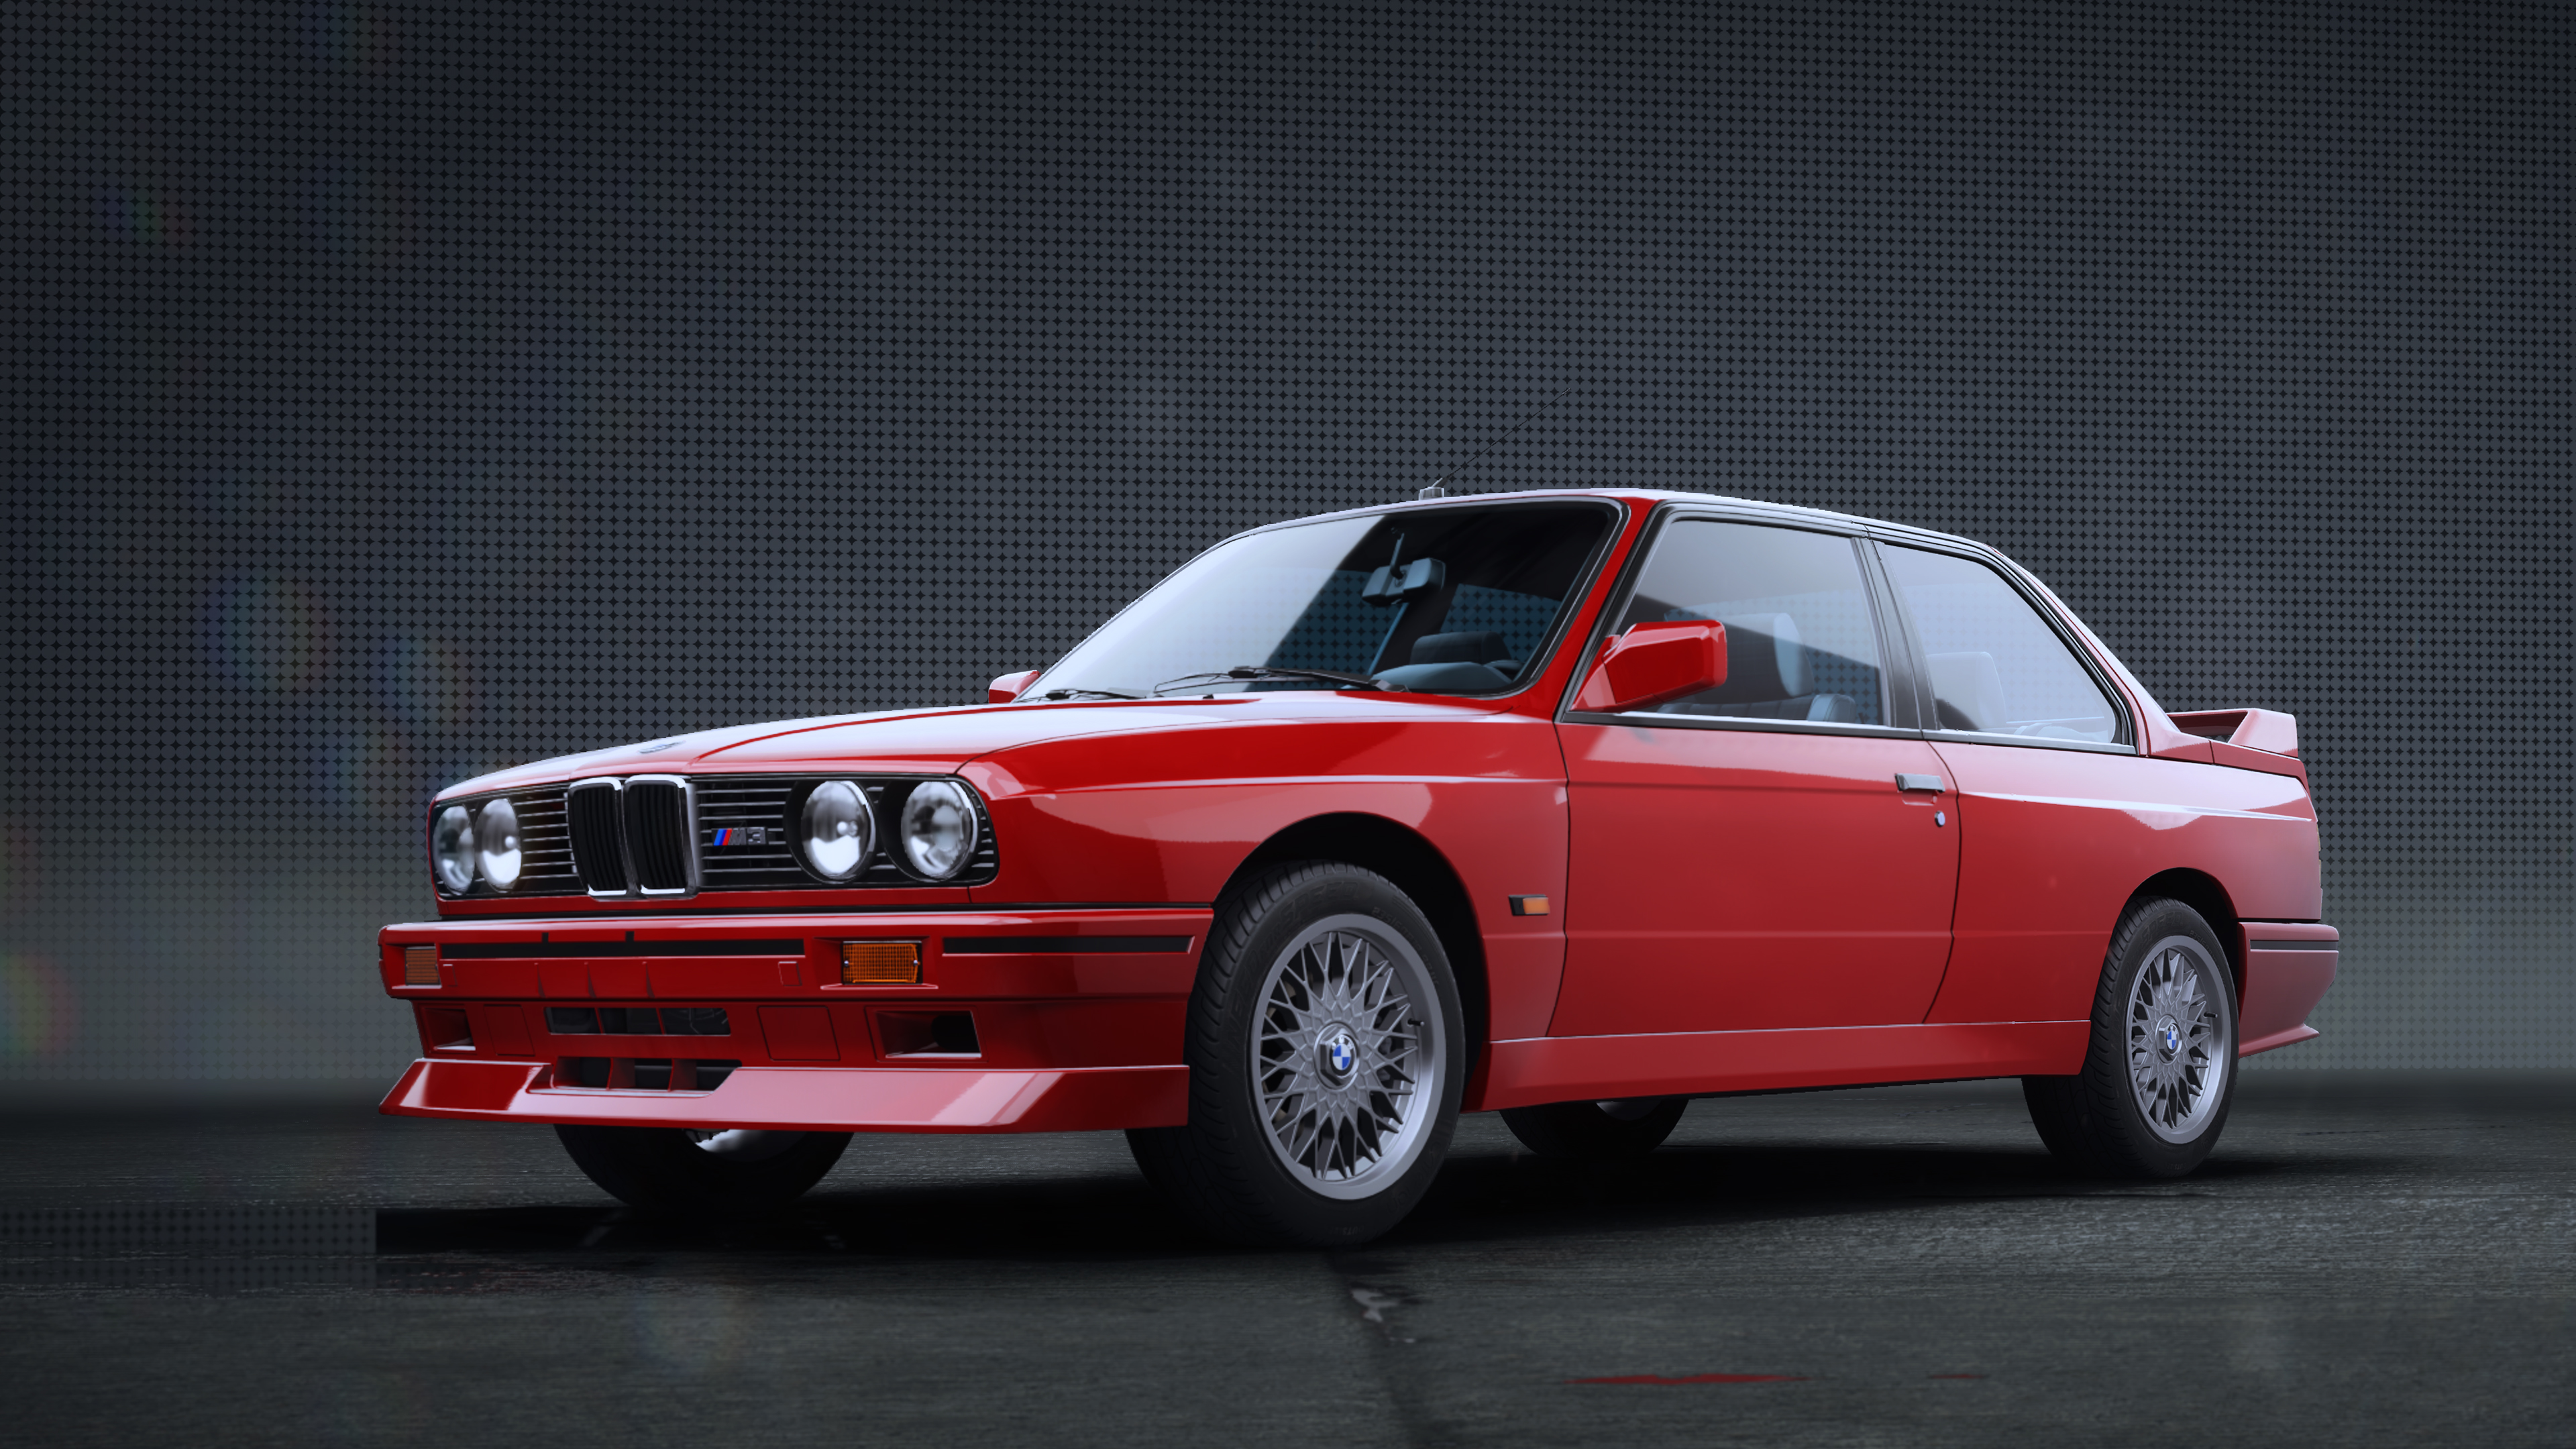 BMW M3 Evolution II (E30), Need for Speed Wiki